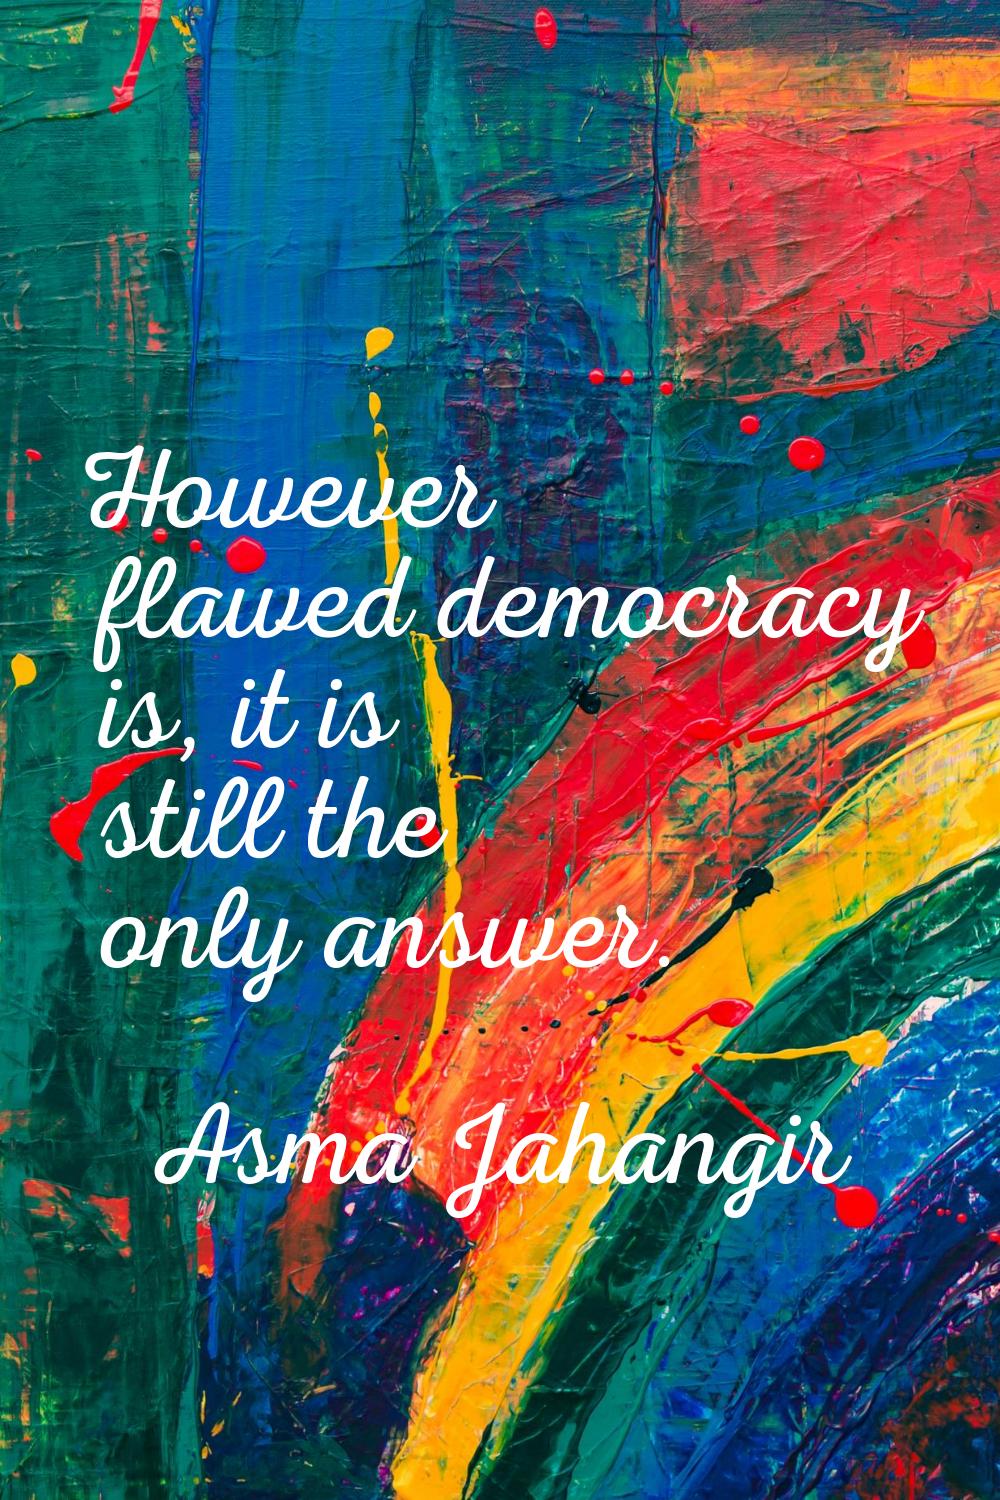 However flawed democracy is, it is still the only answer.